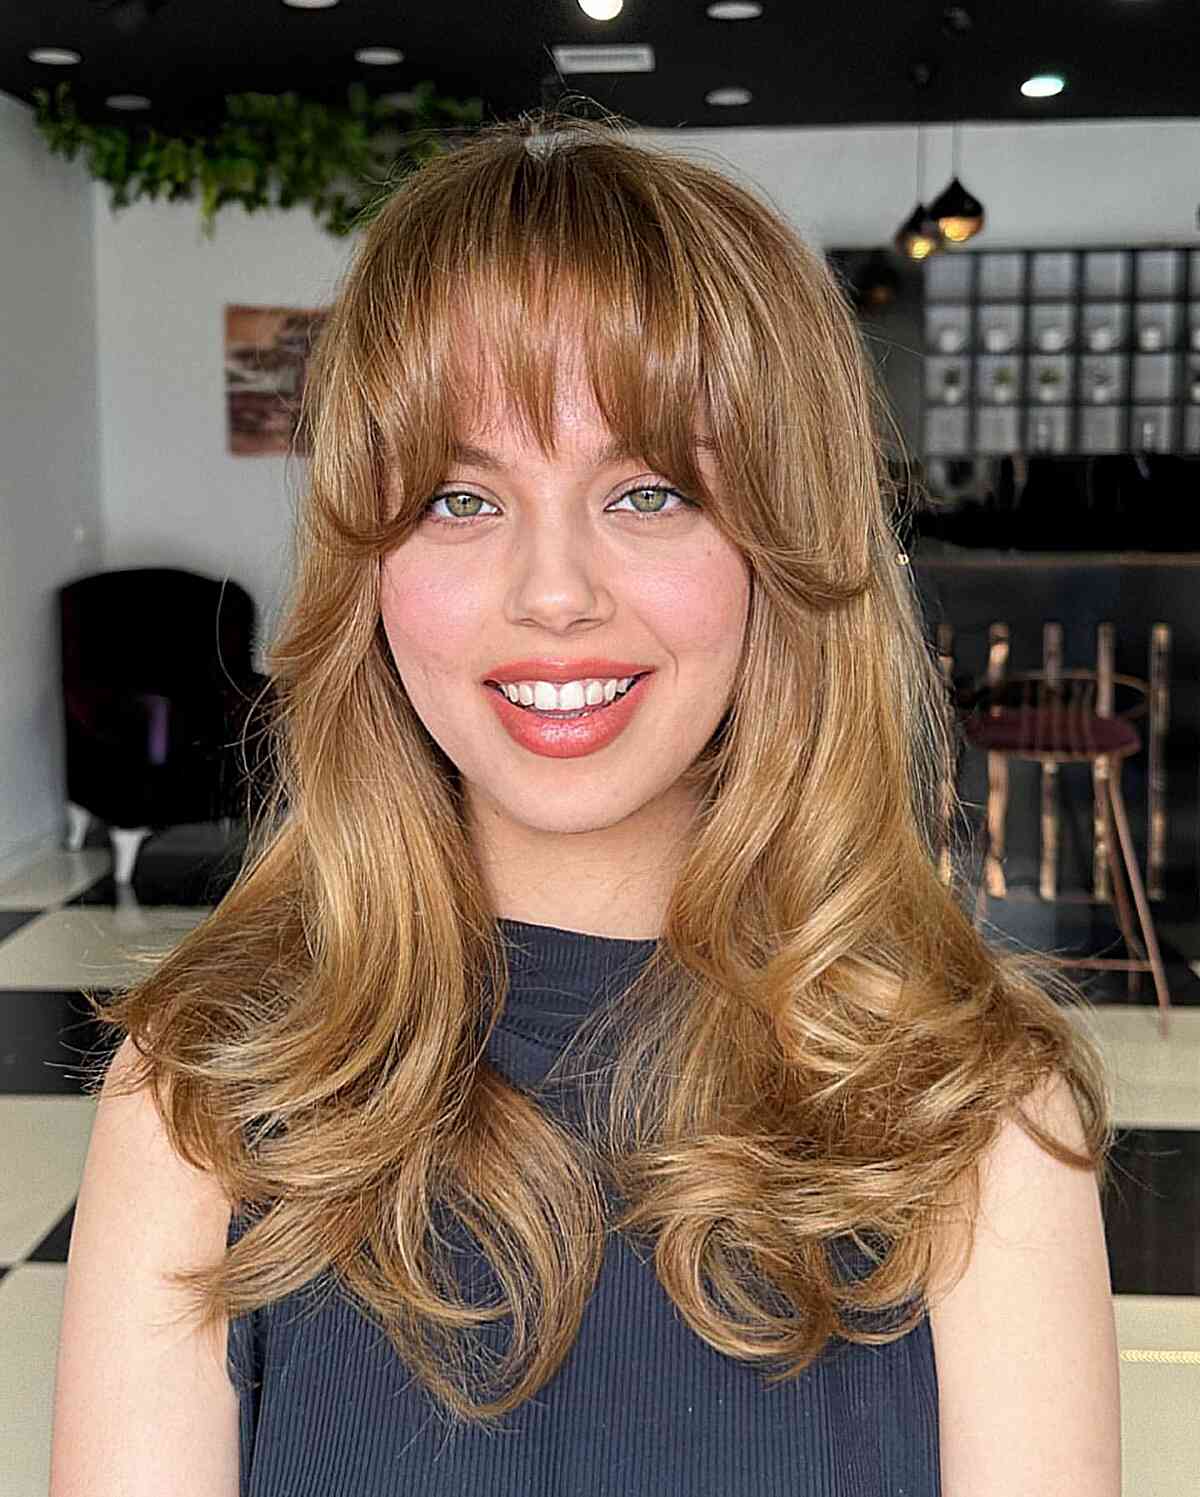 Flowy waterfall Bangs and Curled Ends for Medium hair